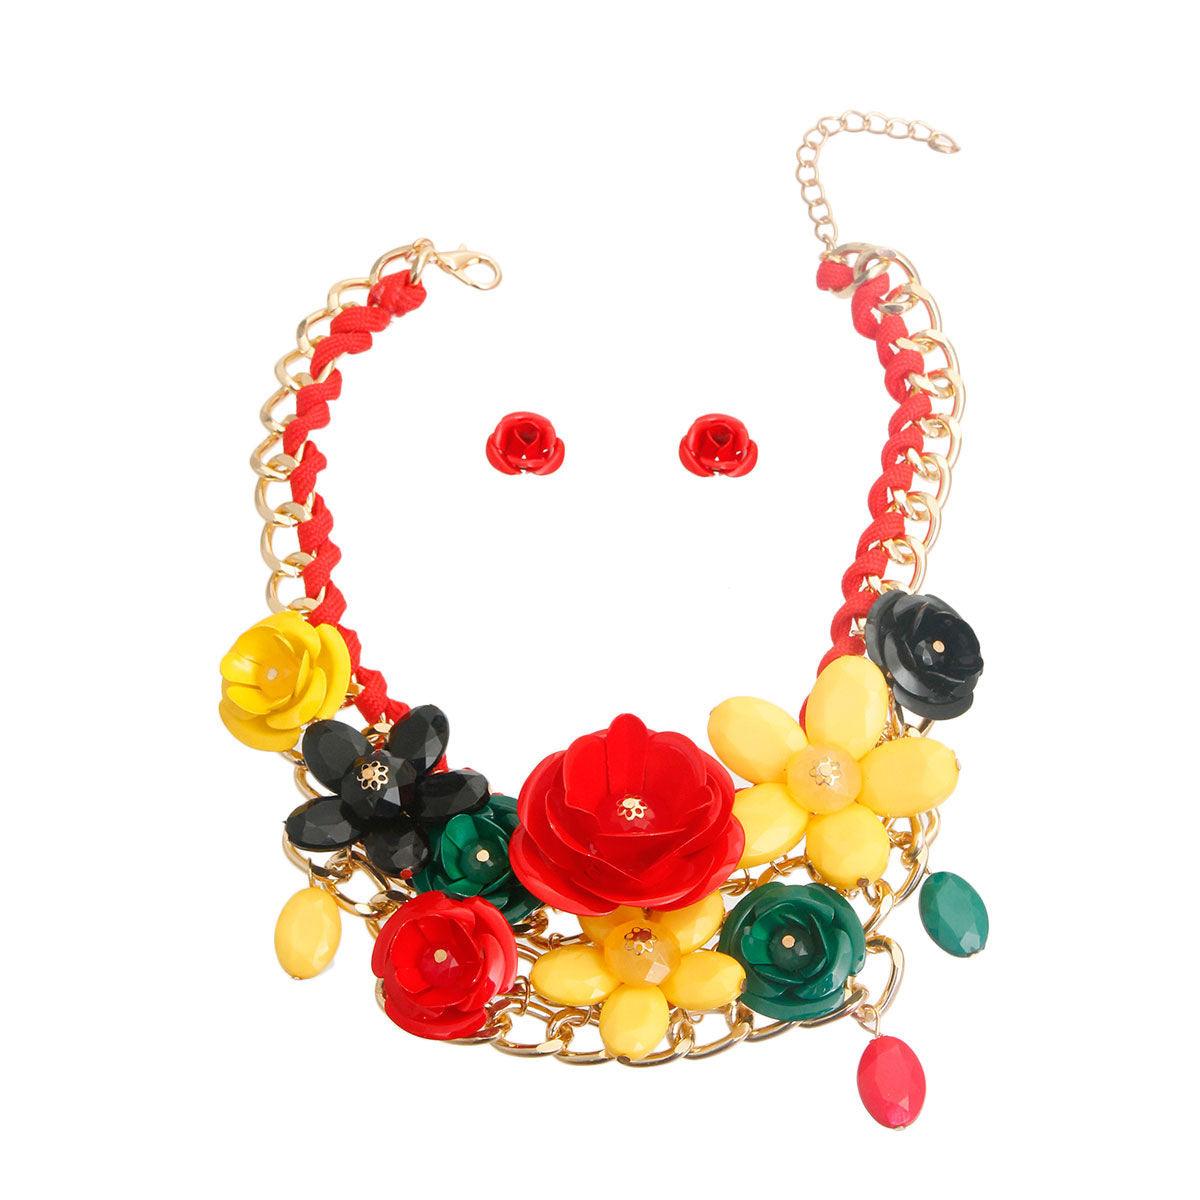 Multicolor Floral Necklace Earrings Set: Blooming Beauty for Summer